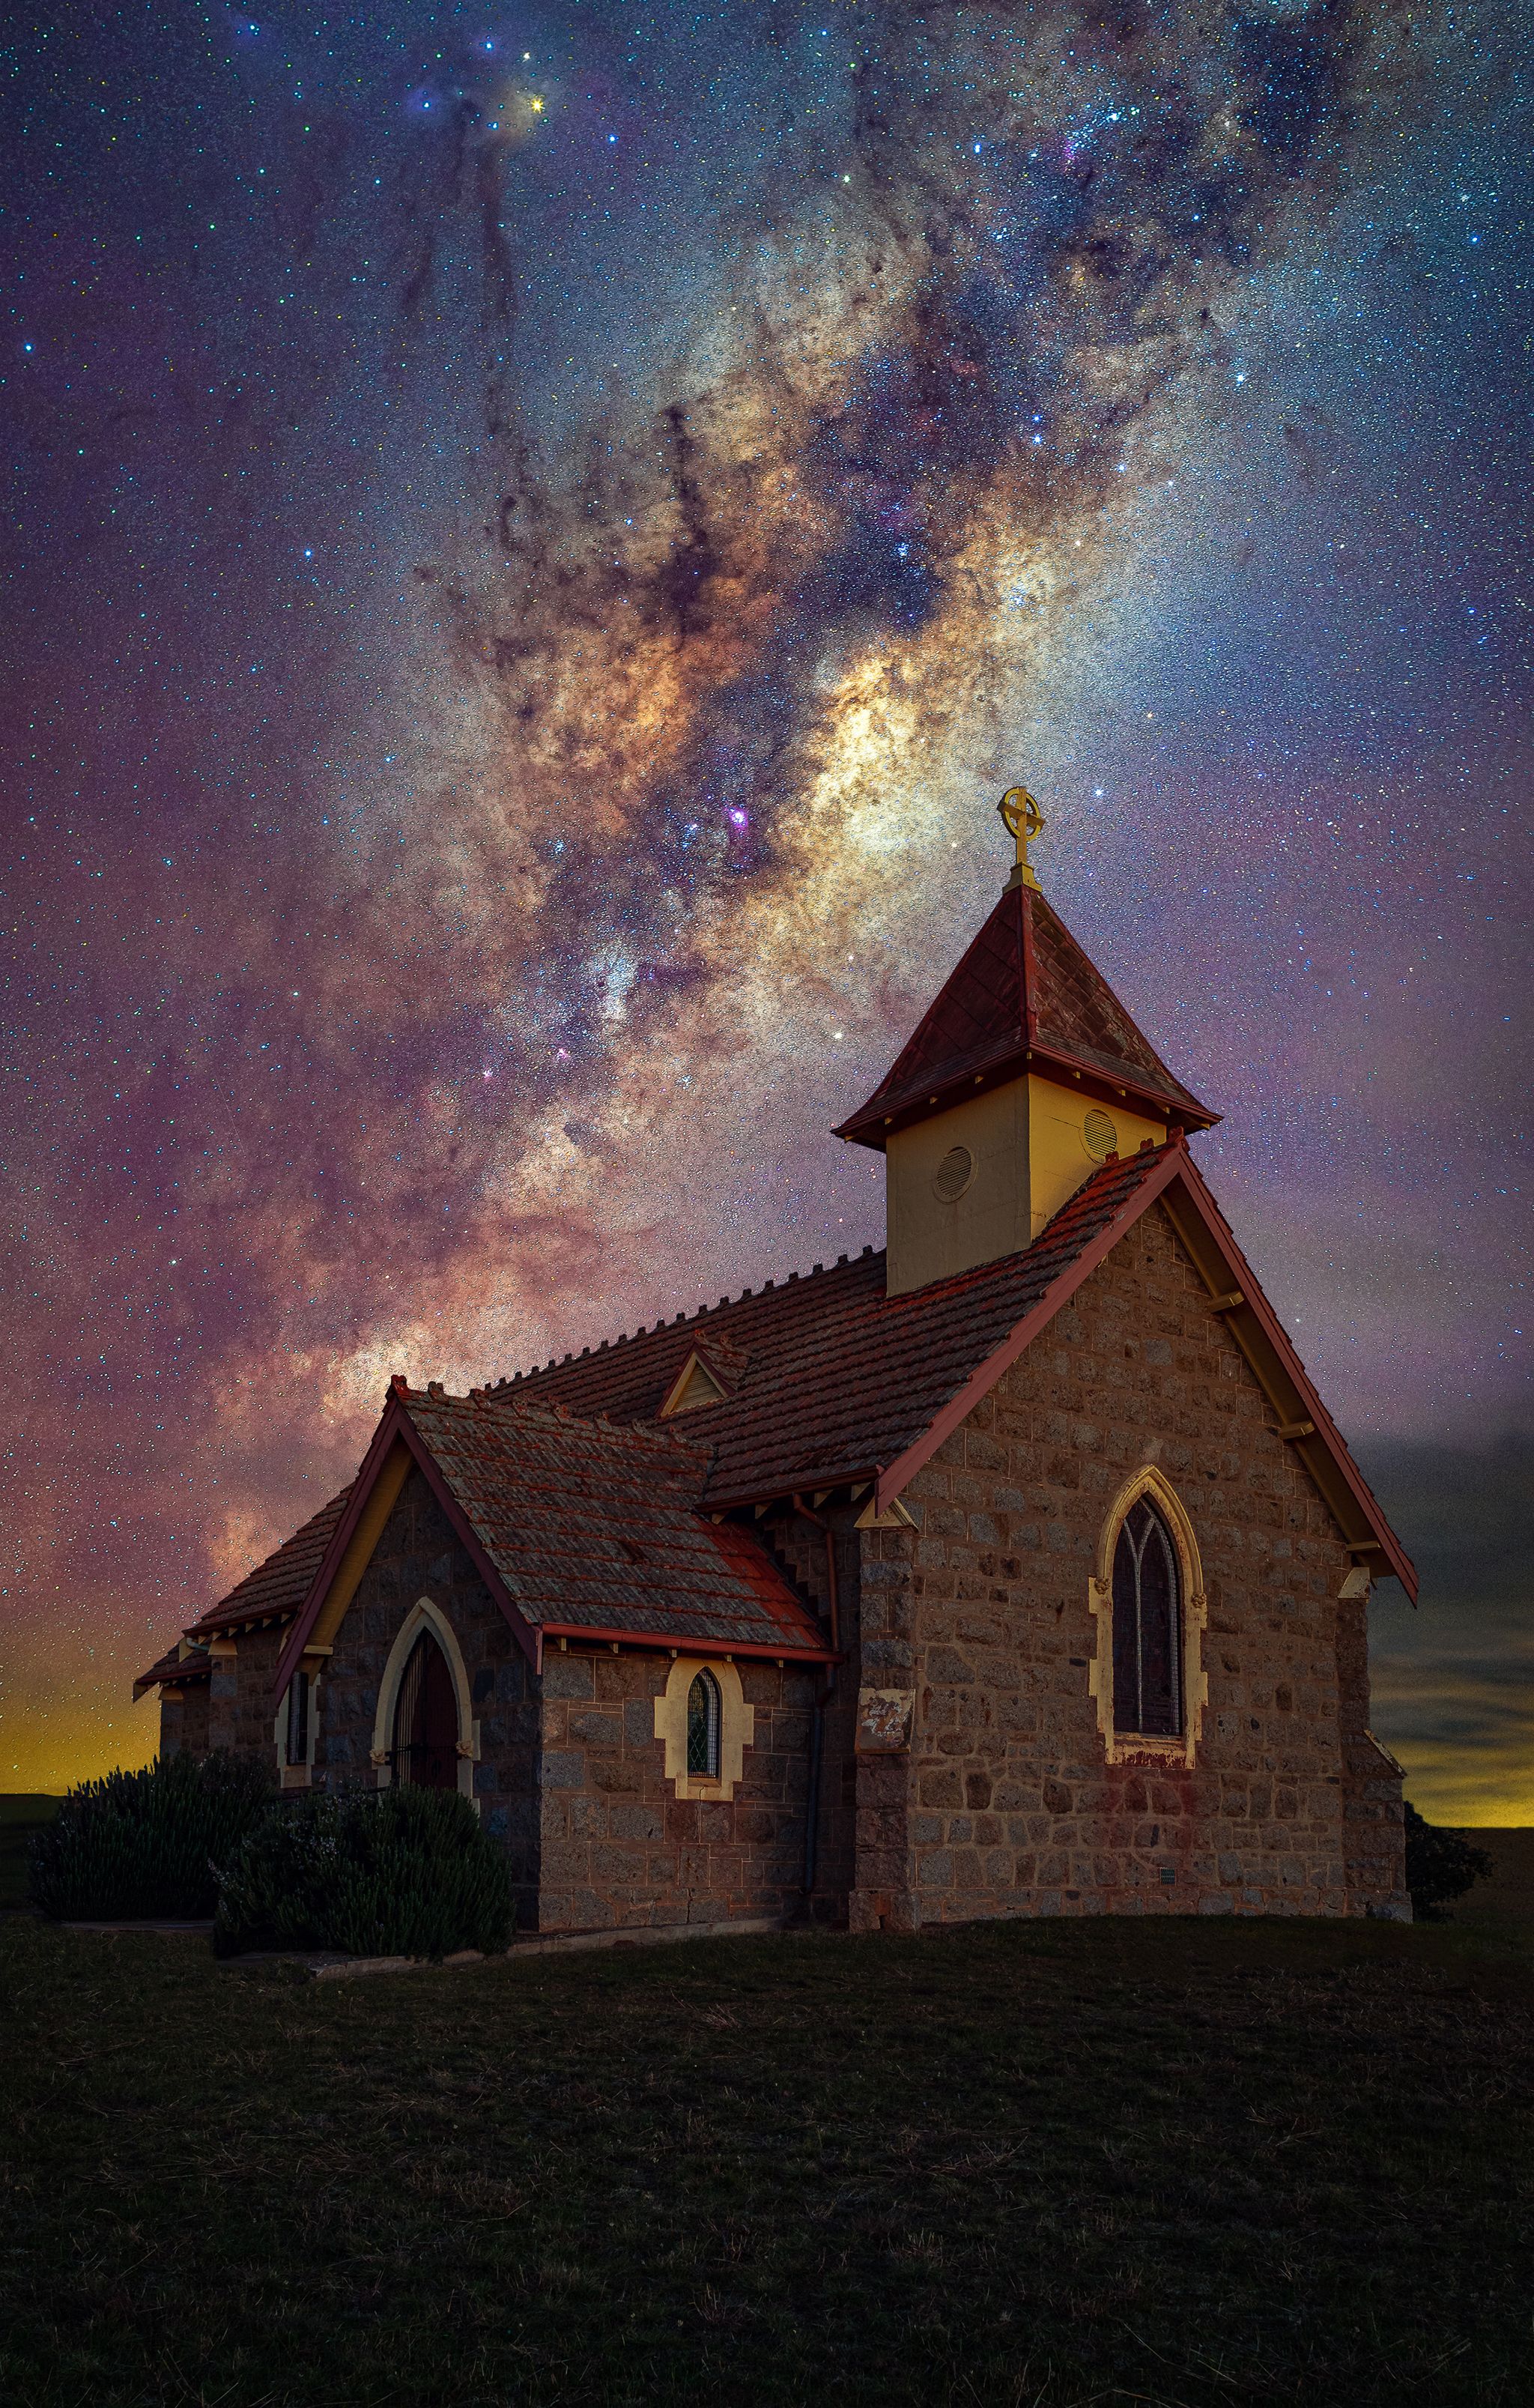 #night #love #church #nightscape #milyway, Fascinating Imagery